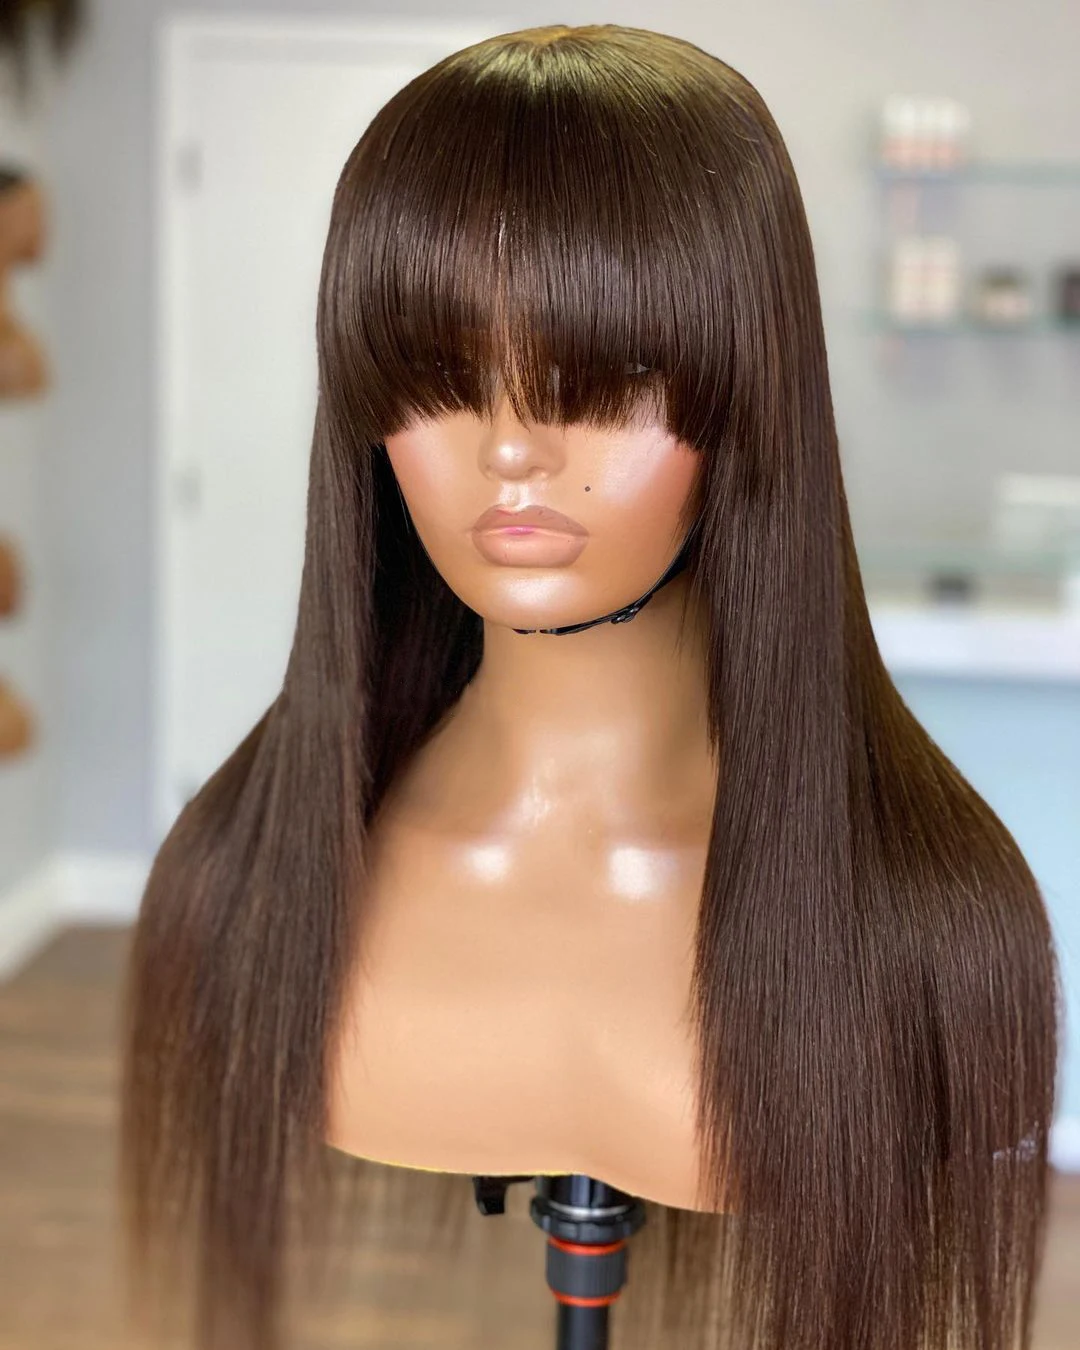 Straight Human Hair Wig with Fringe for Women Remy Hair Wigs With Bangs Dark Brown Balayage Color Glueless Full Machine Made New